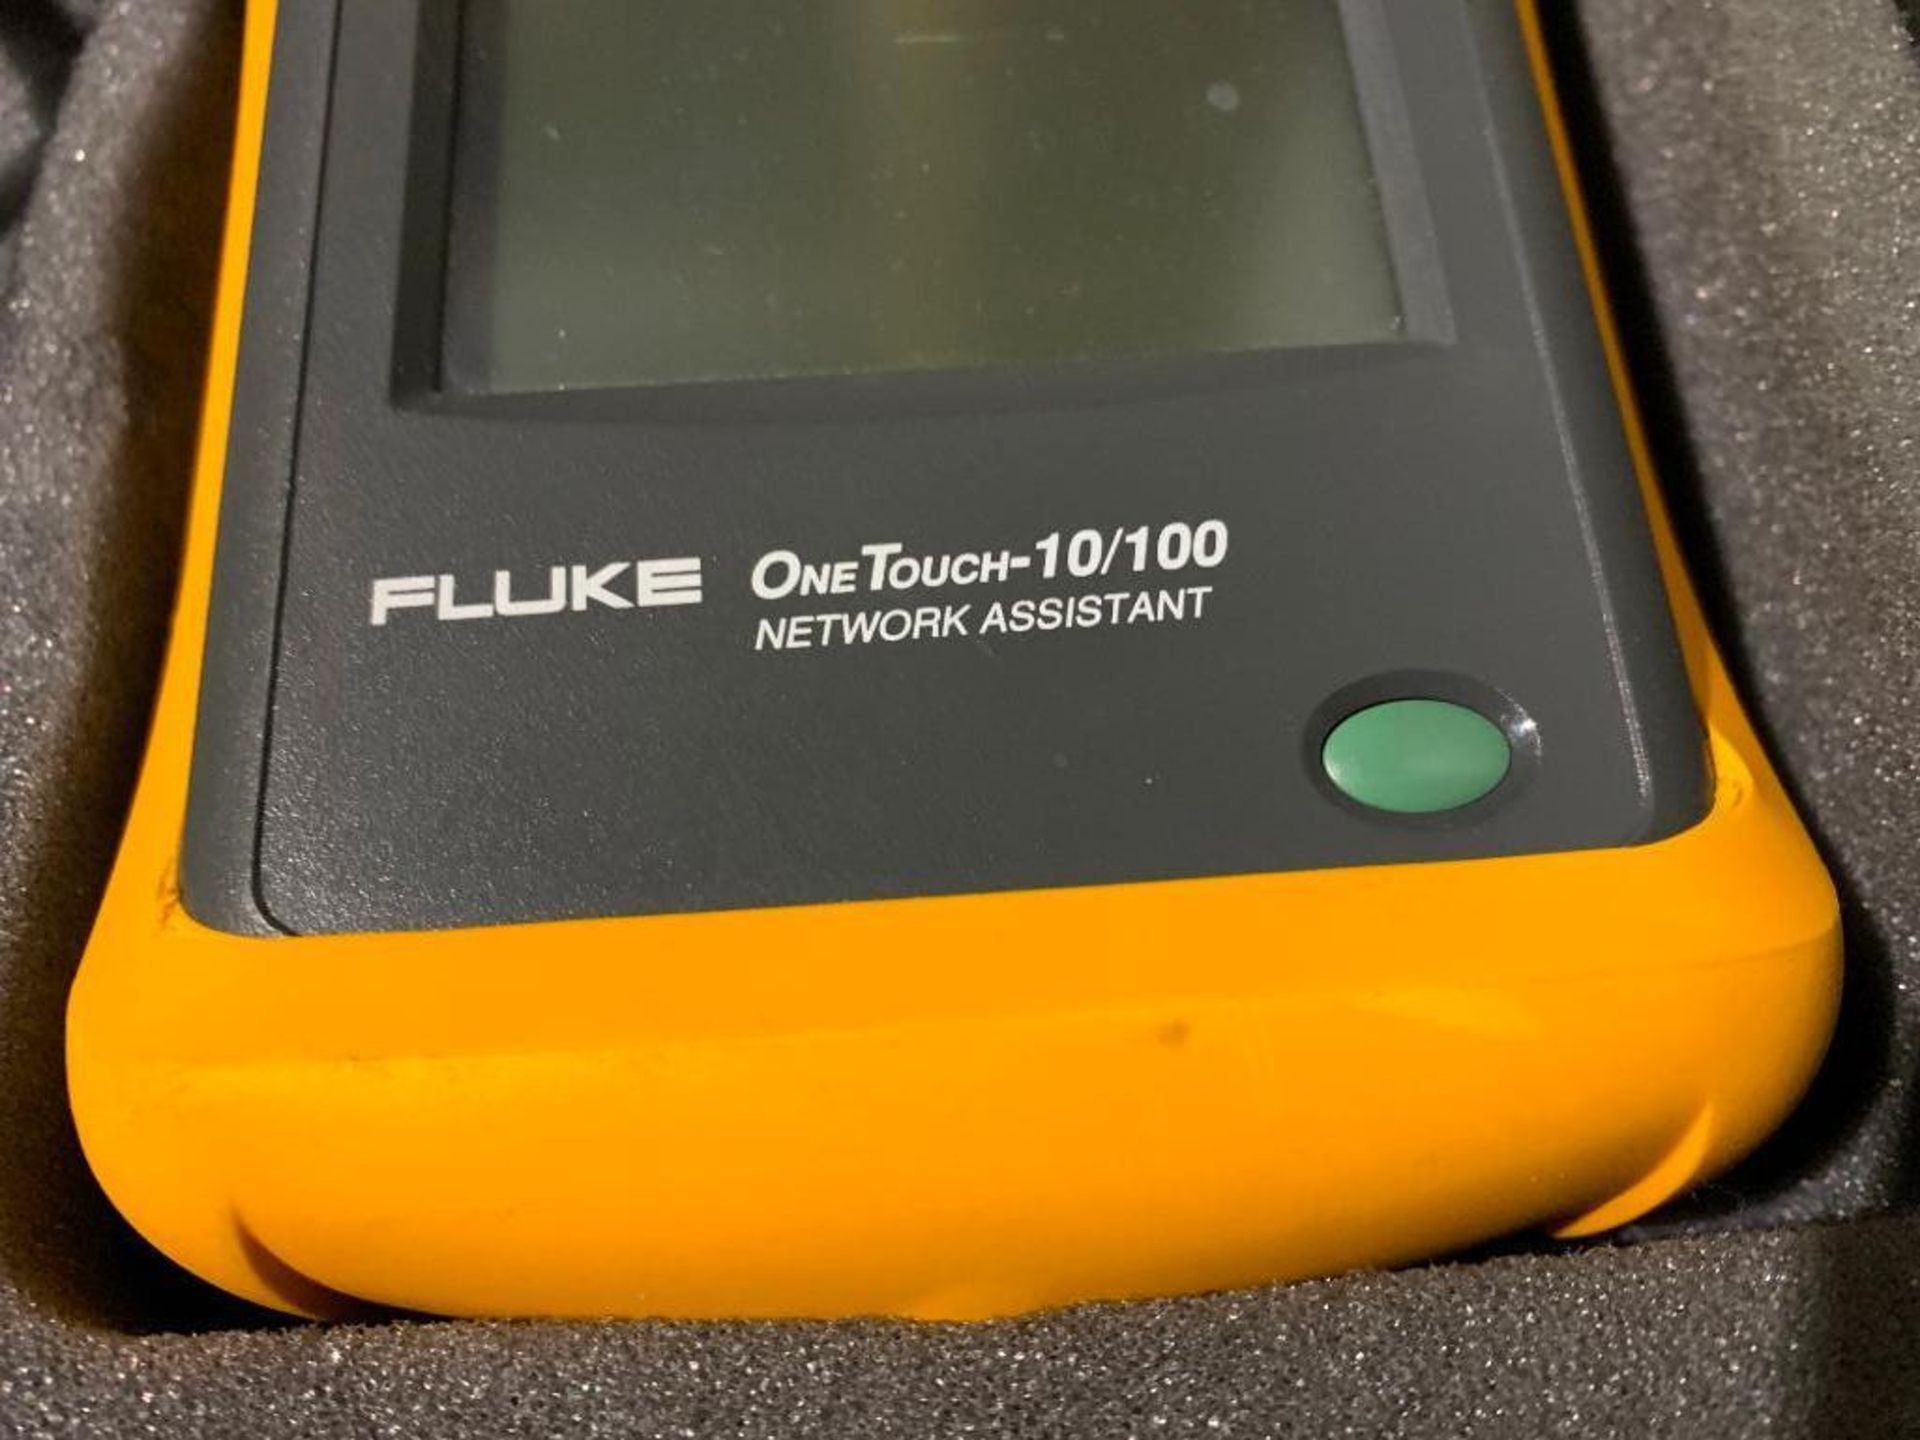 Fluke One Touch-10/100 Network Assistant - Image 3 of 3